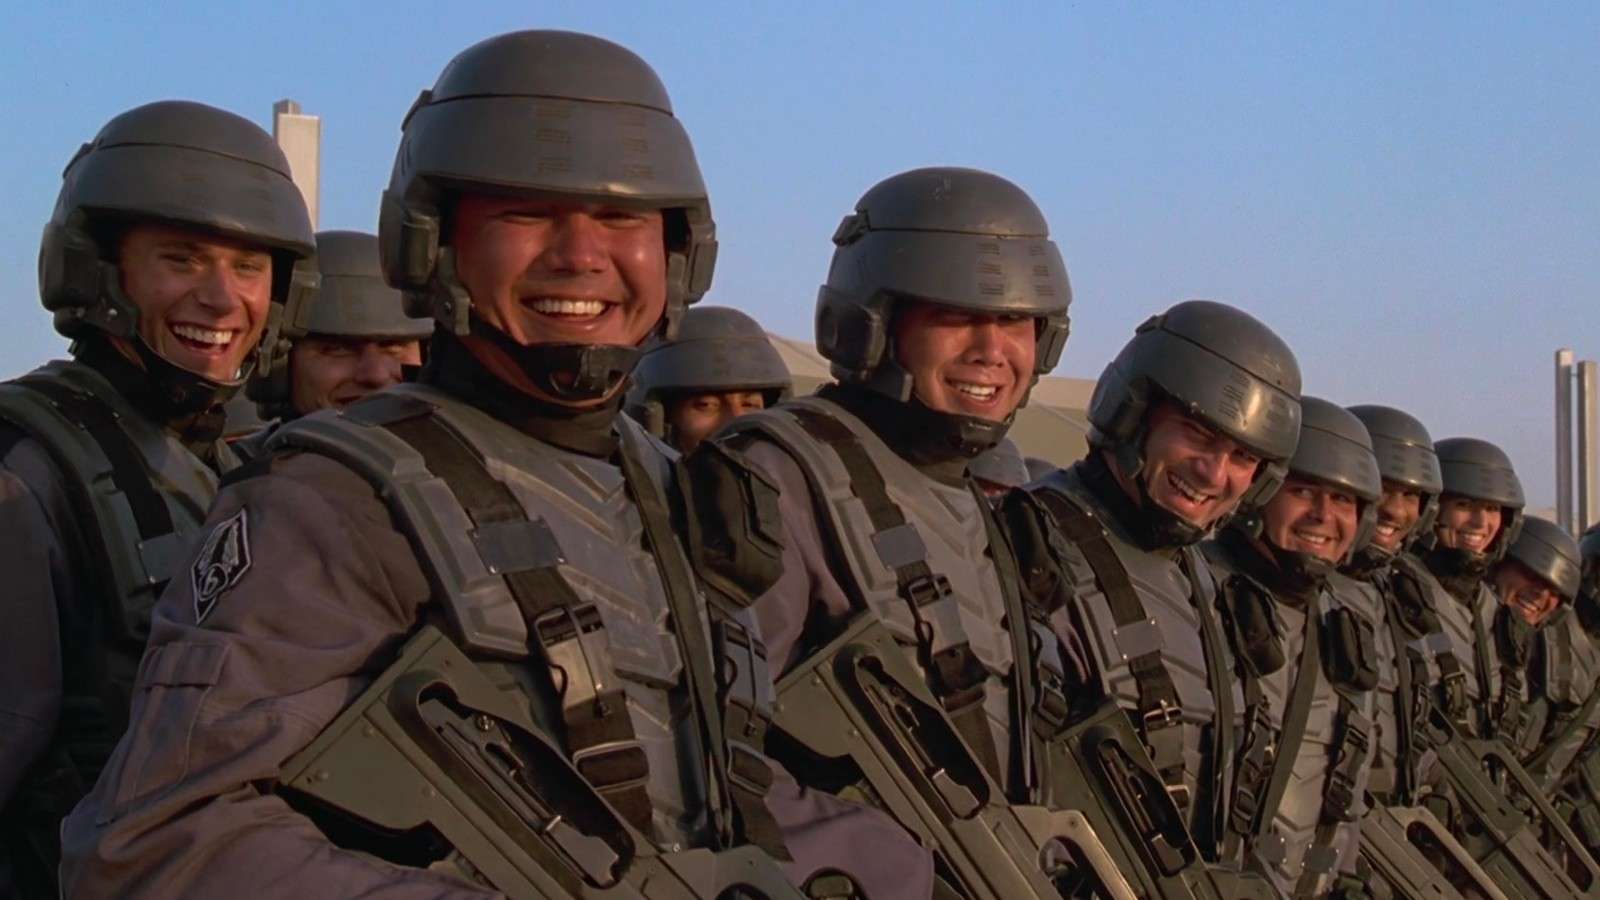 The cast of Starship Troopers